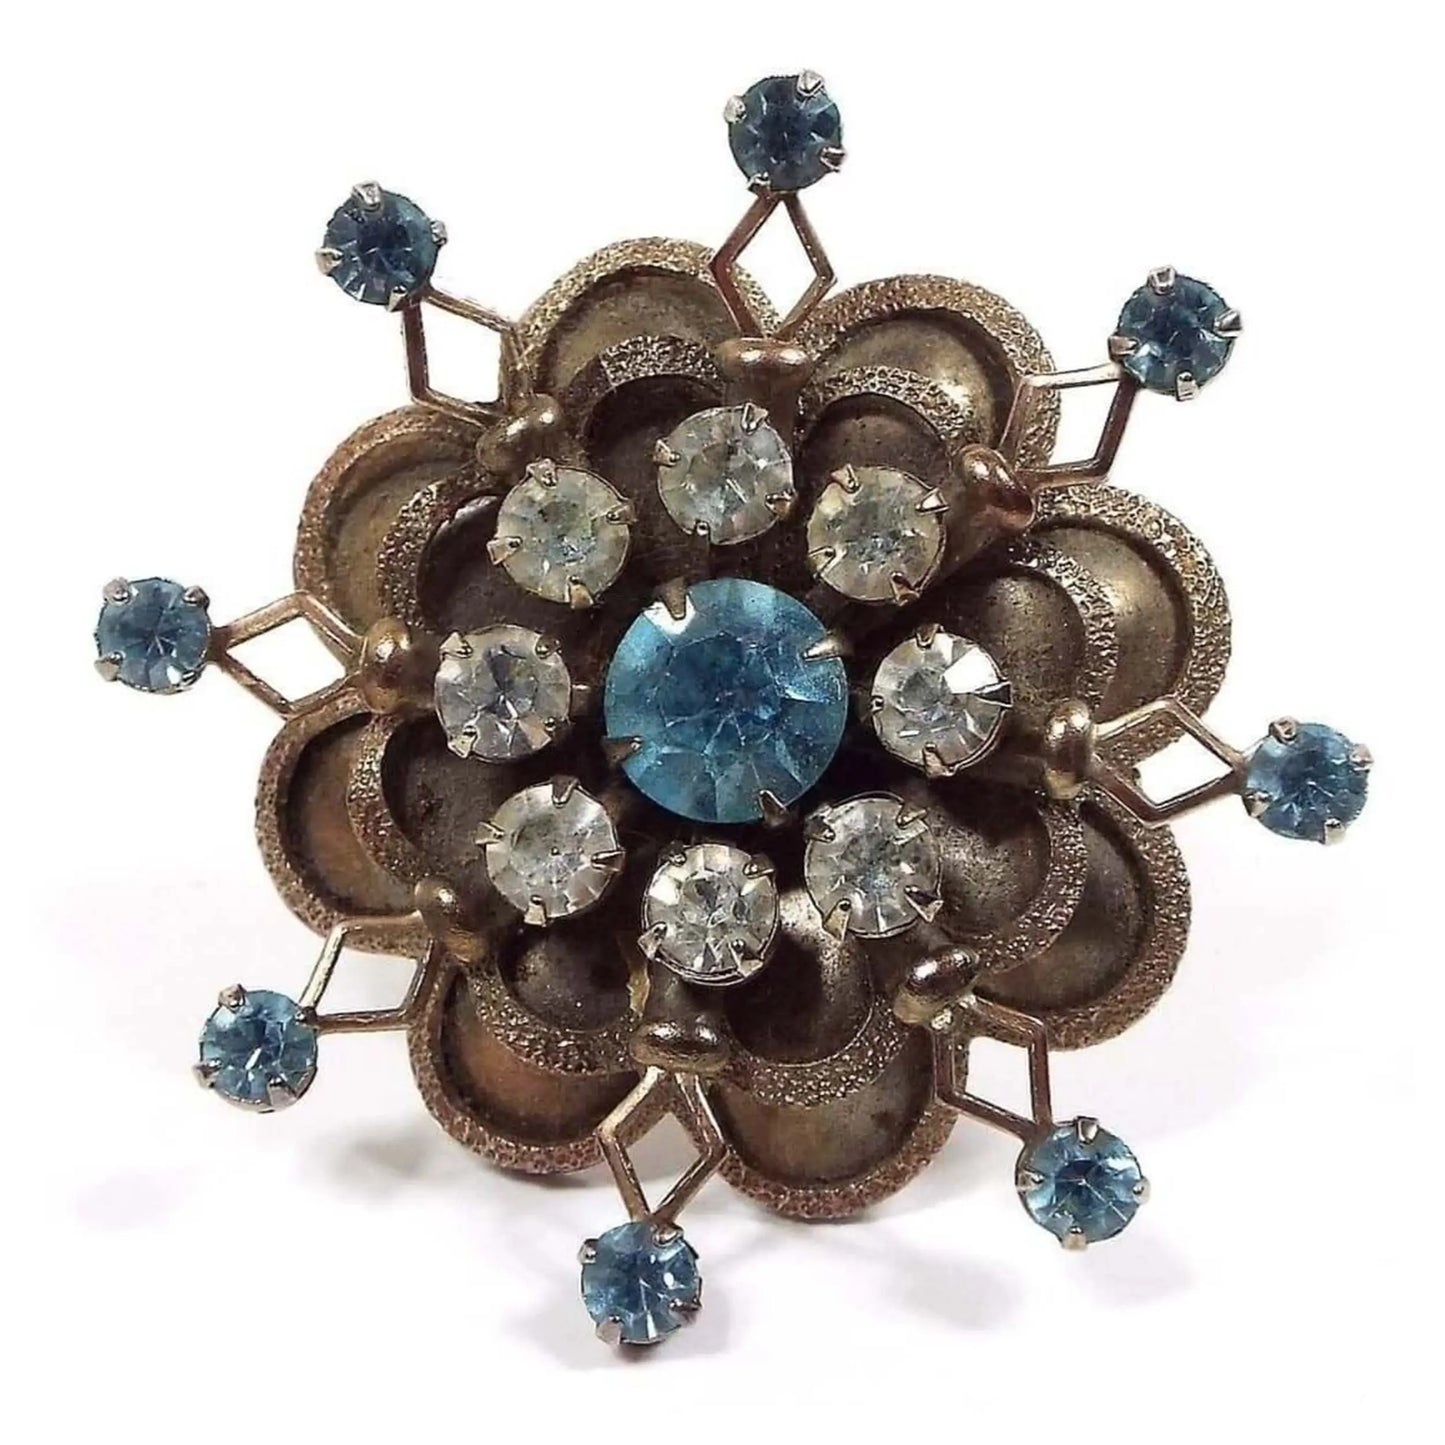 Front view of the 1950's Mid Century vintage rhinestone brooch pin. Brooch has a flower like starburst design. Middle rhinestone is round with light blue color and is surrounded by smaller round clear rhinestones. Some of the clear rhinestones are lightly cloudy and not perfectly clear. There are two layers of small rounded petals around the edge with textured edges. The bottom layer of petals has an open diamond shape in between each petal with a small round light blue rhinestone at the end of each.